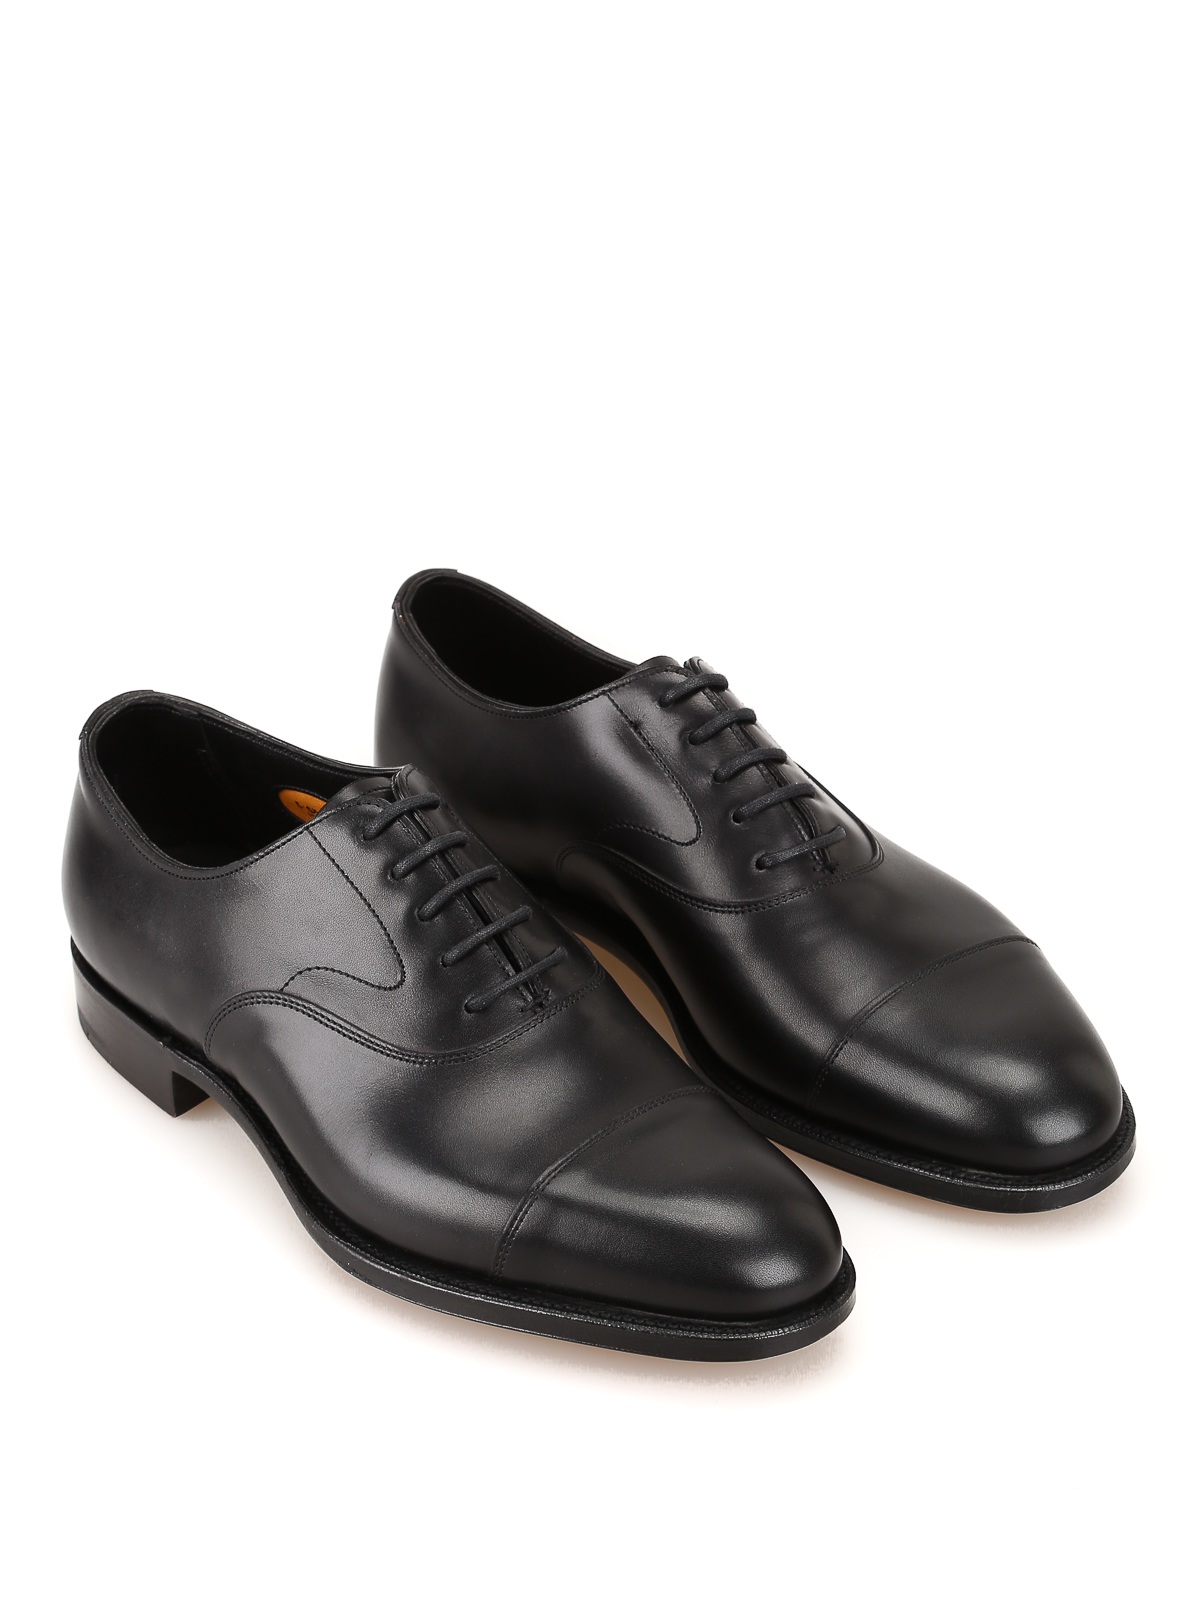 Chelsea calf leather Oxford shoes 